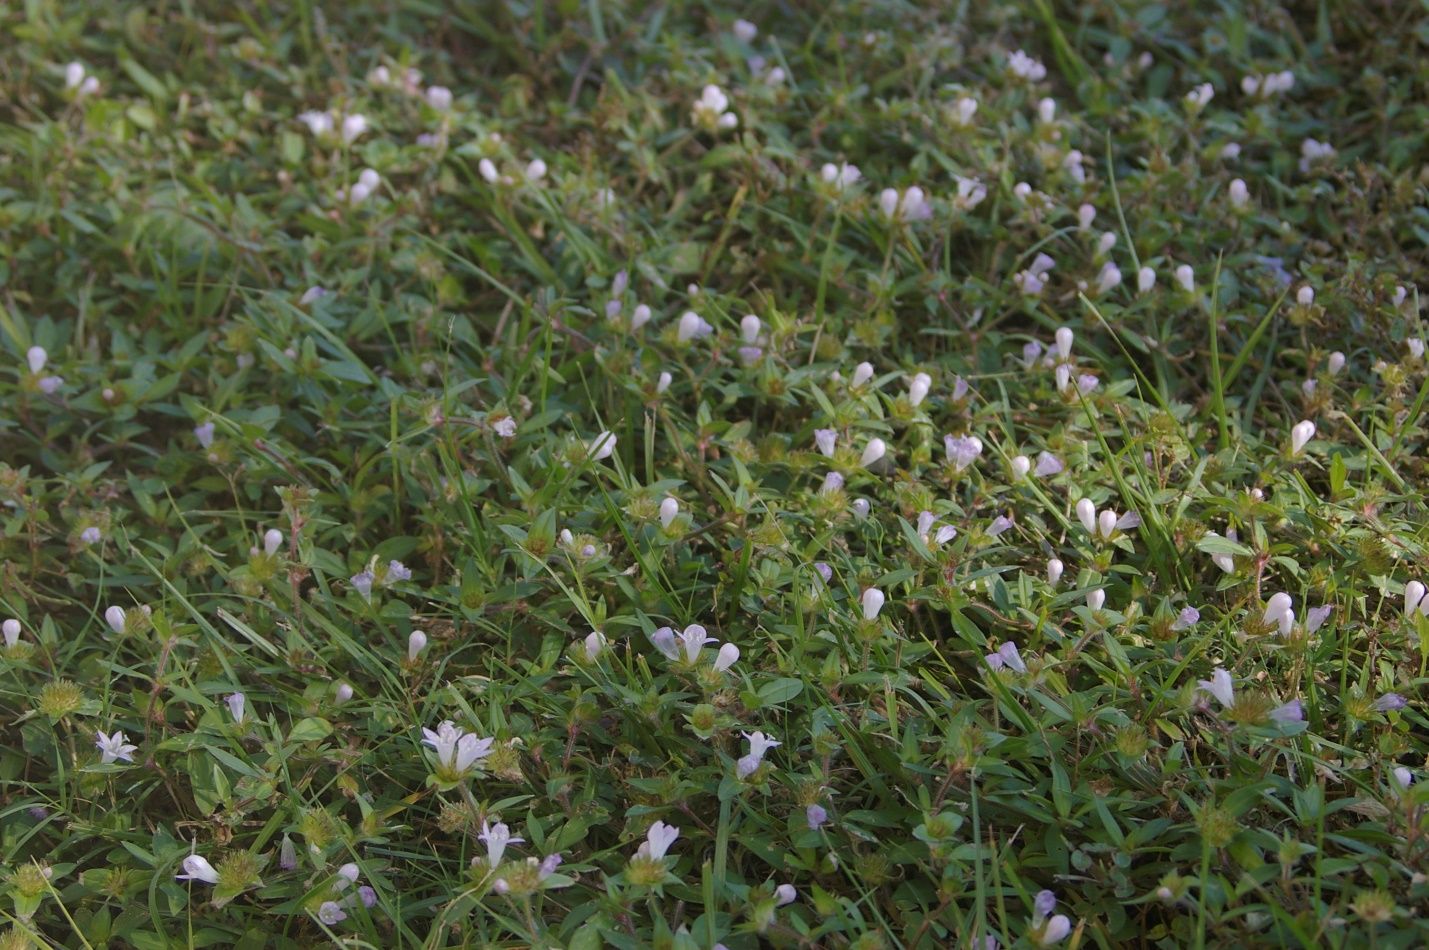 Largeflower pusley can root along its stems, forming dense mats in turfgrass or in landscape planting beds. 